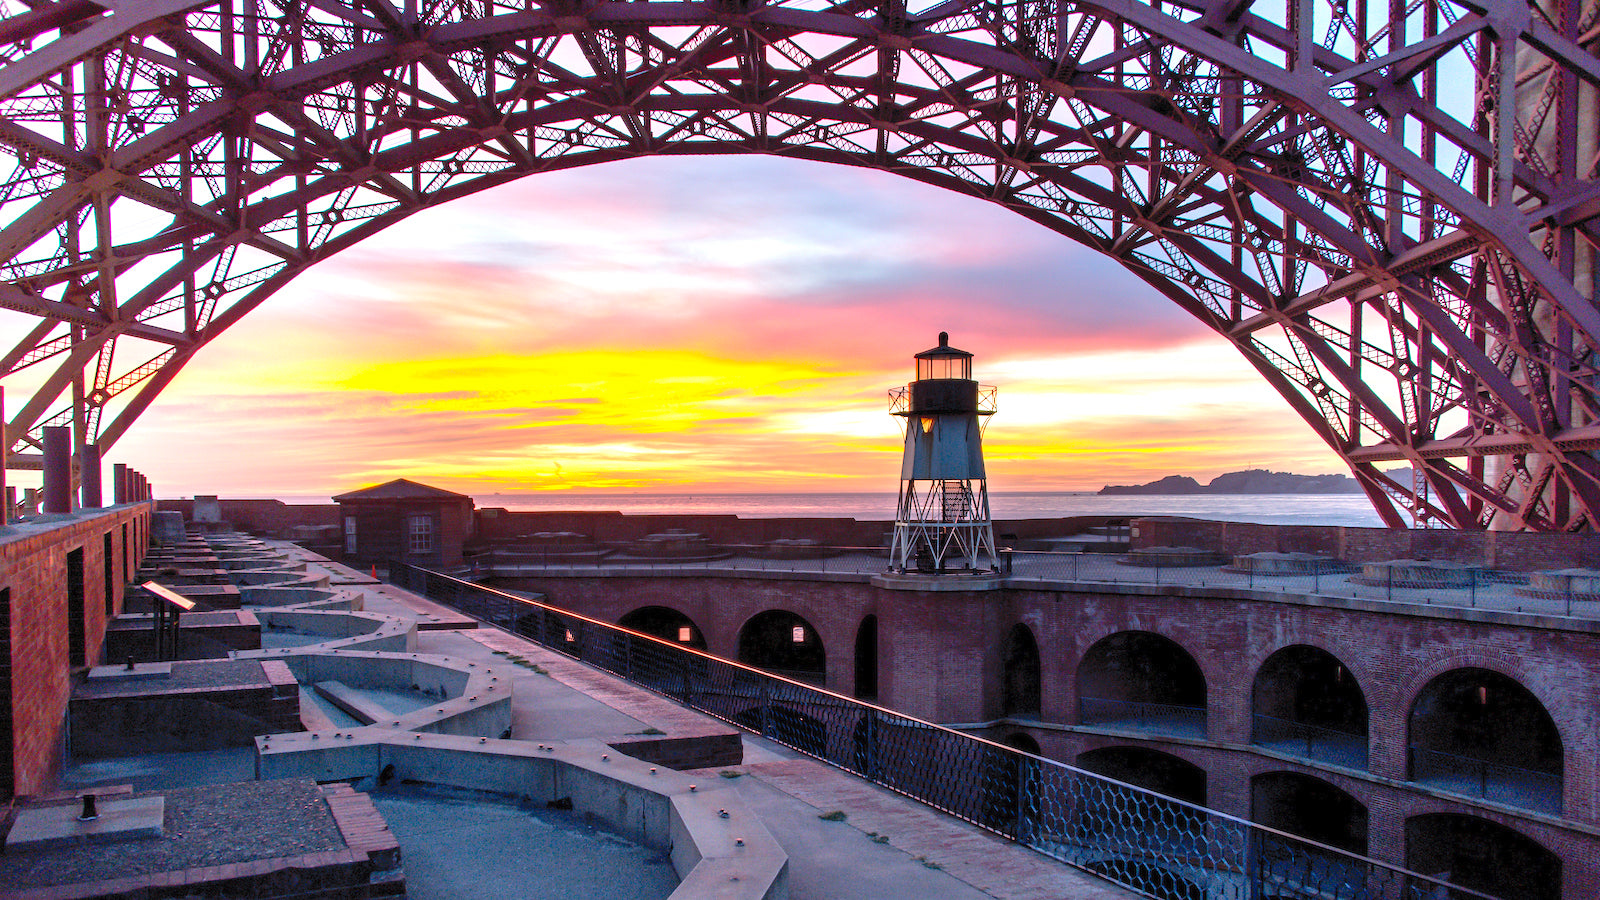 A dramatic view from the roof of Fort Point at sunset. The clouds are brightly lit pink, yellow, and purple, while the steelwork of the Golden Gate Bridge soars above.